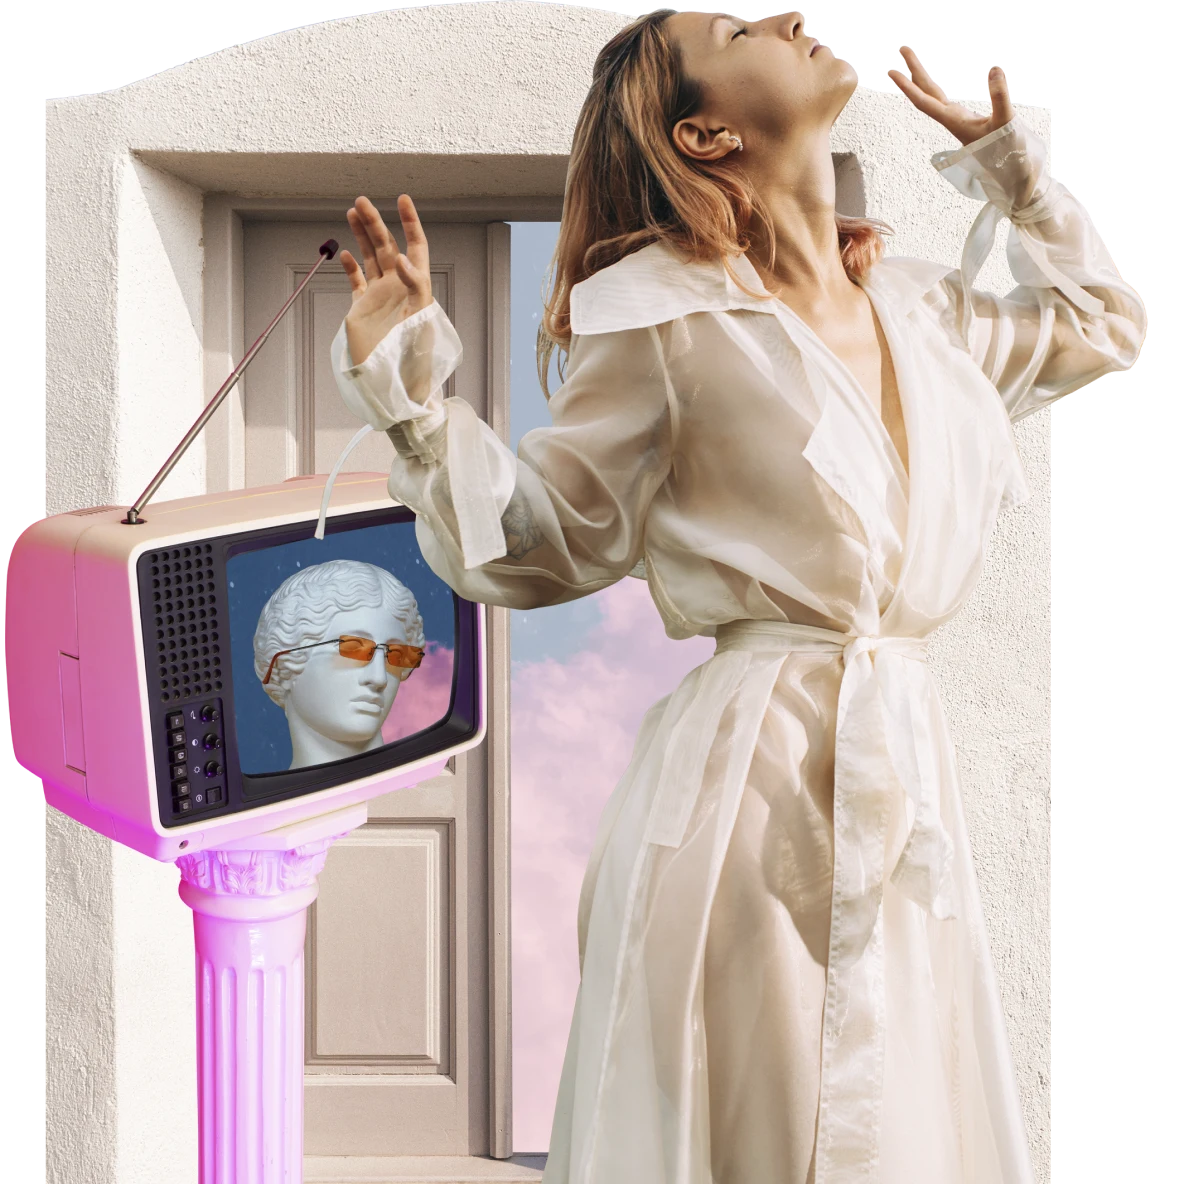 A woman in a clear white raincoat throws her head and hands back. A small pink TV on a pink pedestal is on the left,with a white marble bust in the screen. Doorway arch in the background.